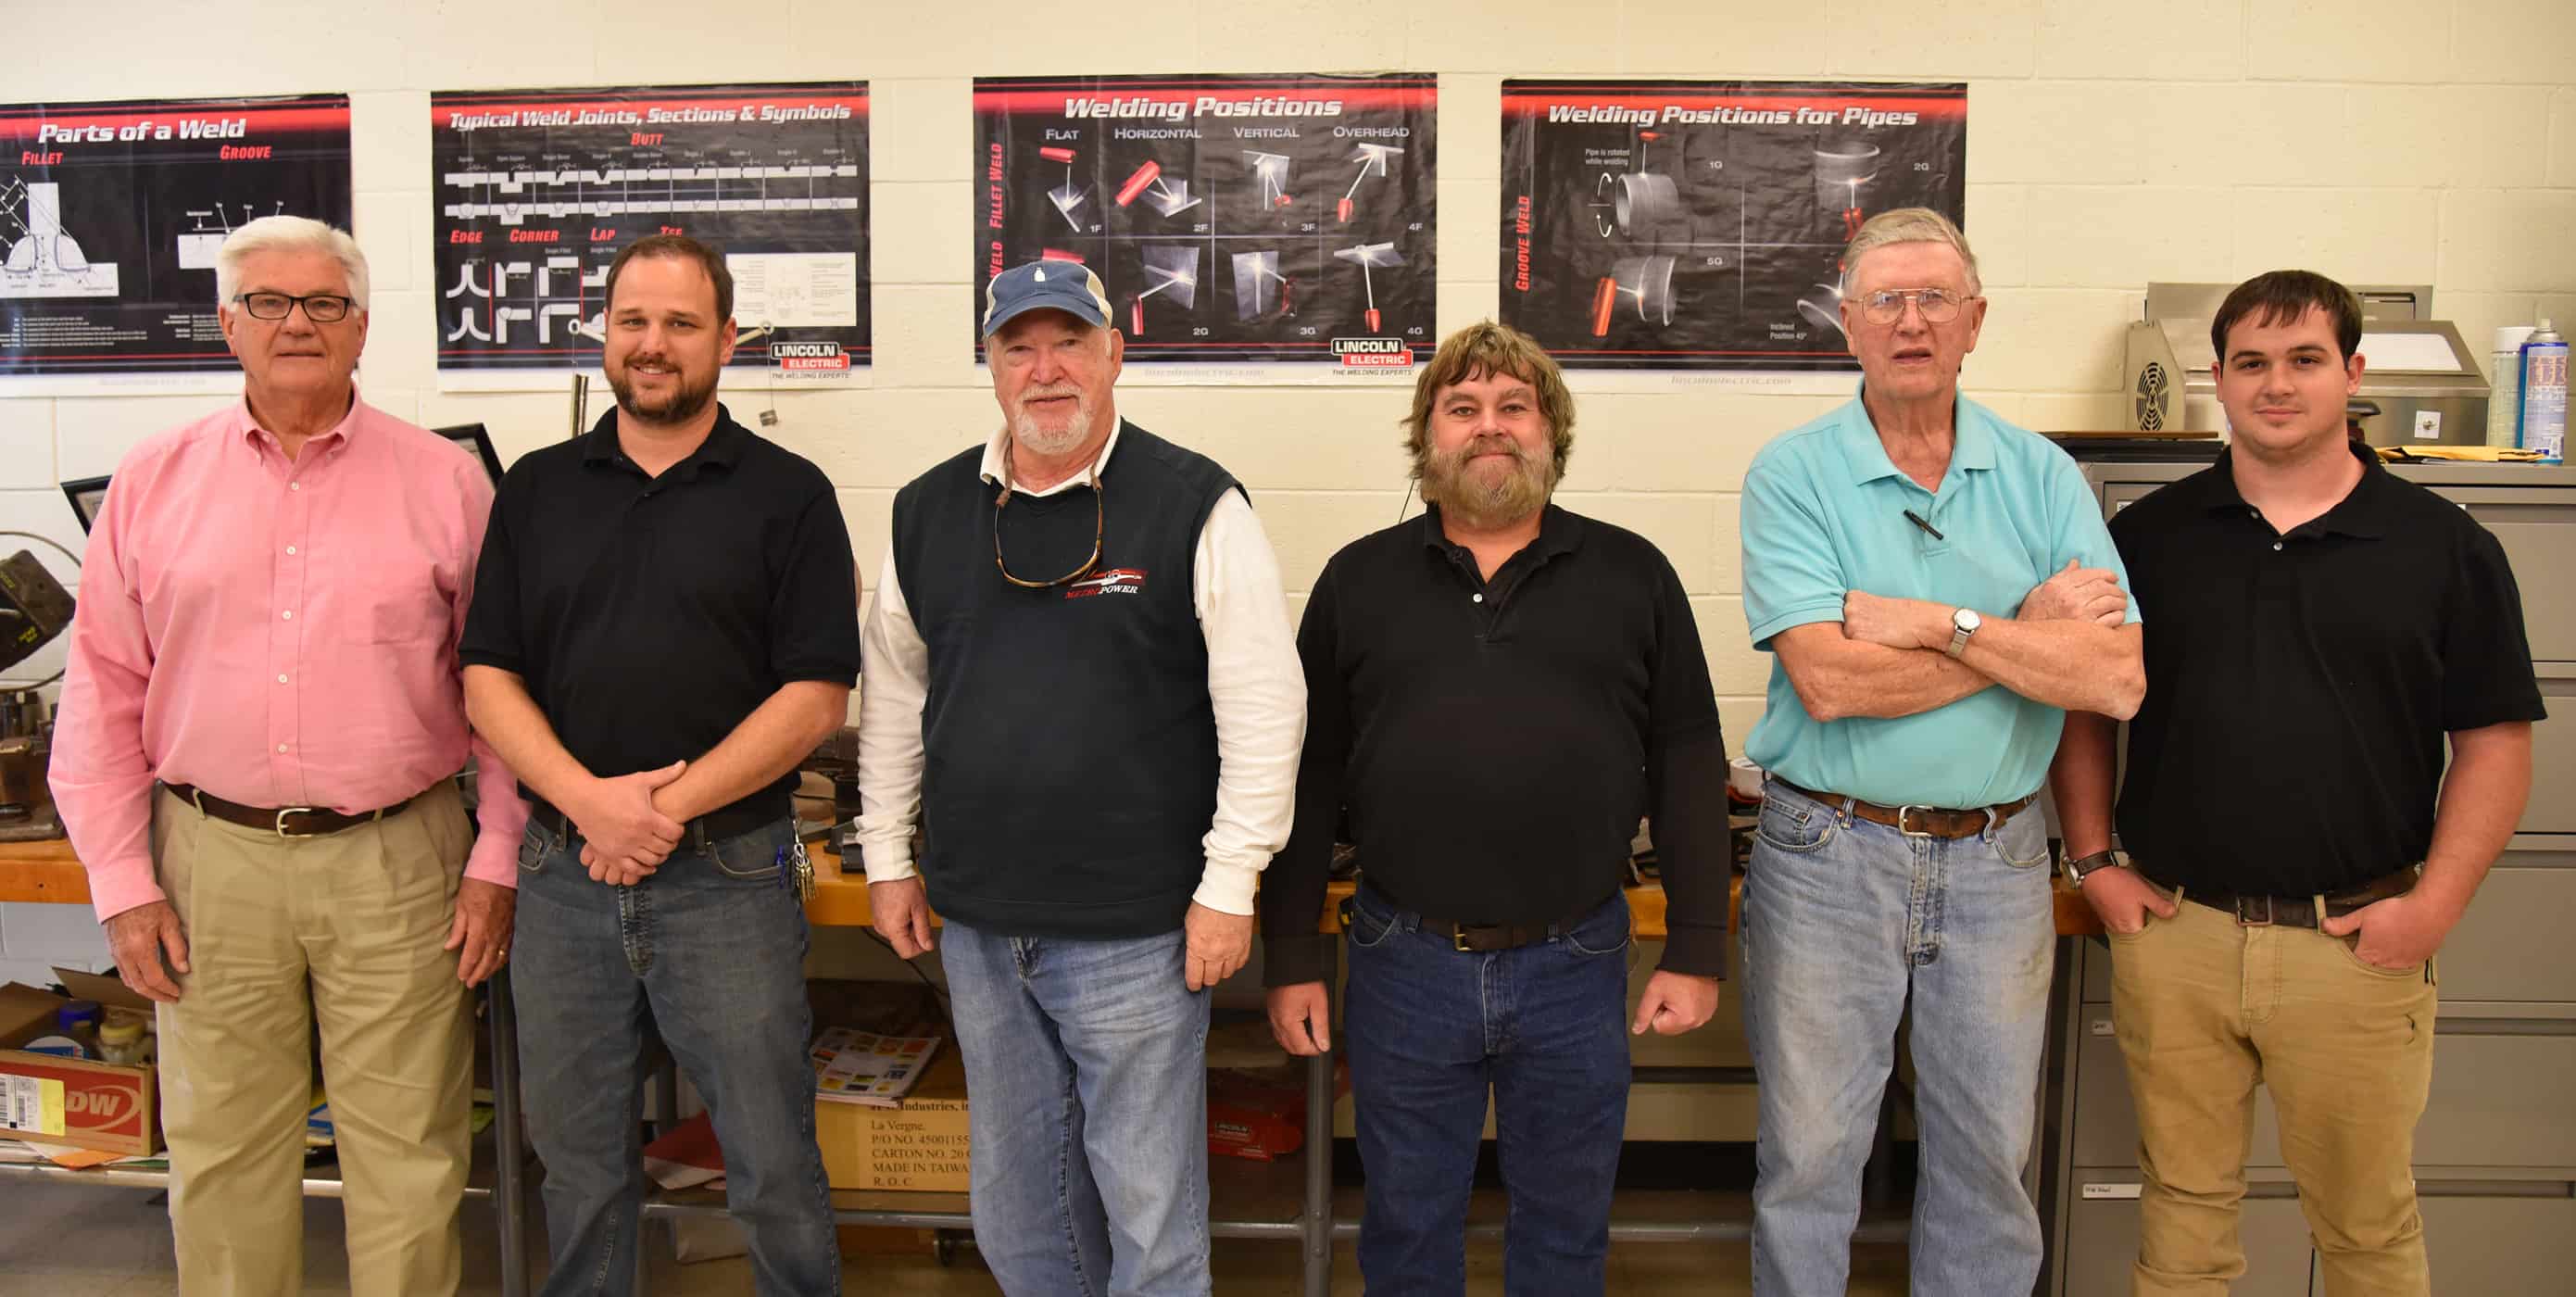 South Georgia Technical College’s Welding Advisory Committee stands in the welding classroom before their semi-annual meeting. Members from left to right are Raymond Holt, Ted Eschmann, Steve Barrett, Wayne Parker, Don Smith and Gray Rowe.